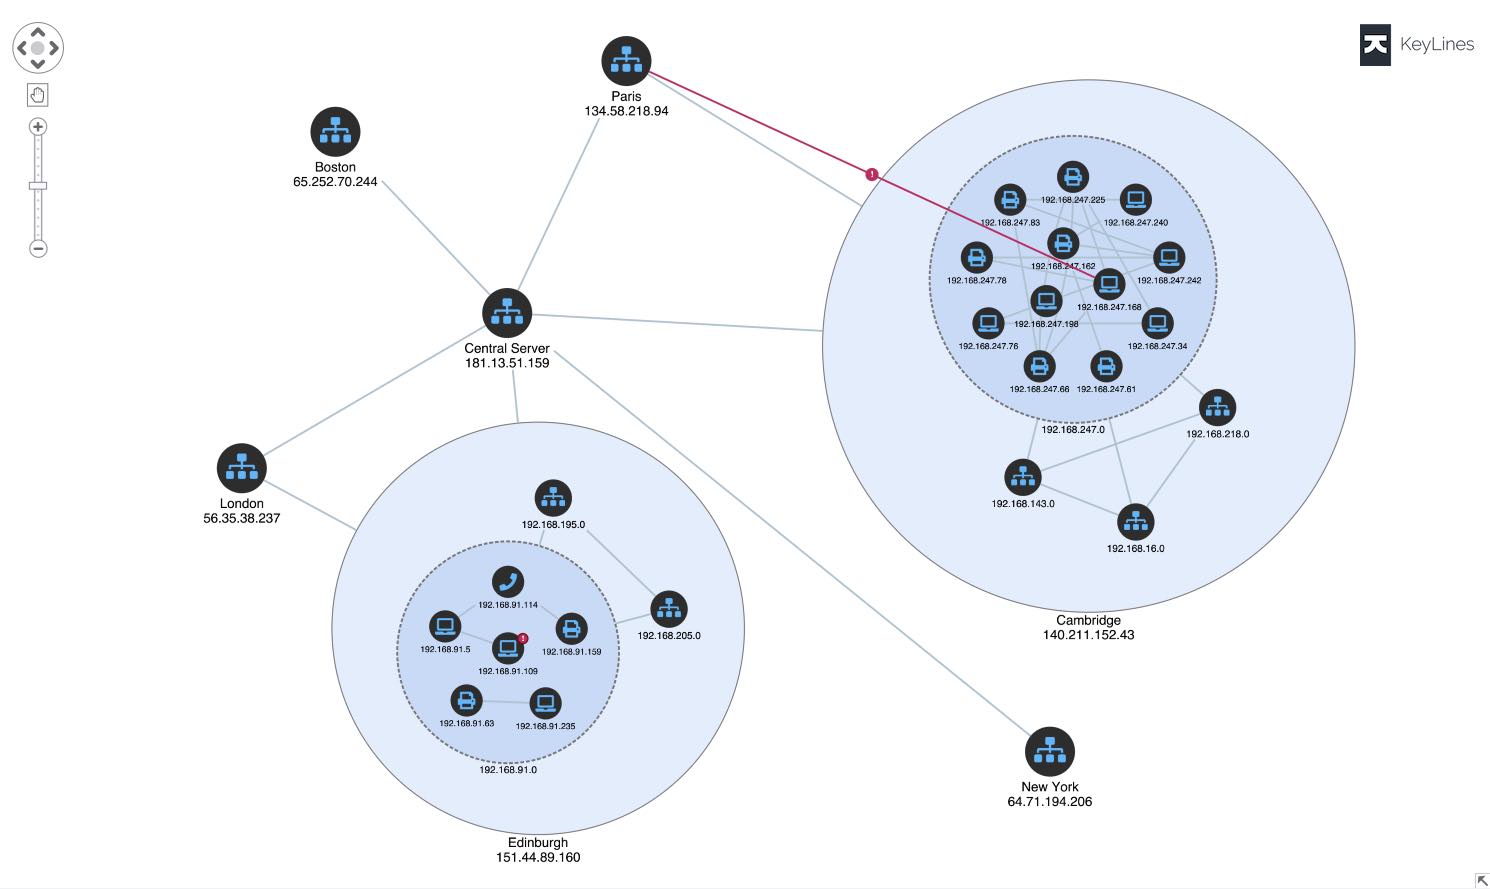 visualizing root cause analysis with network mapping software